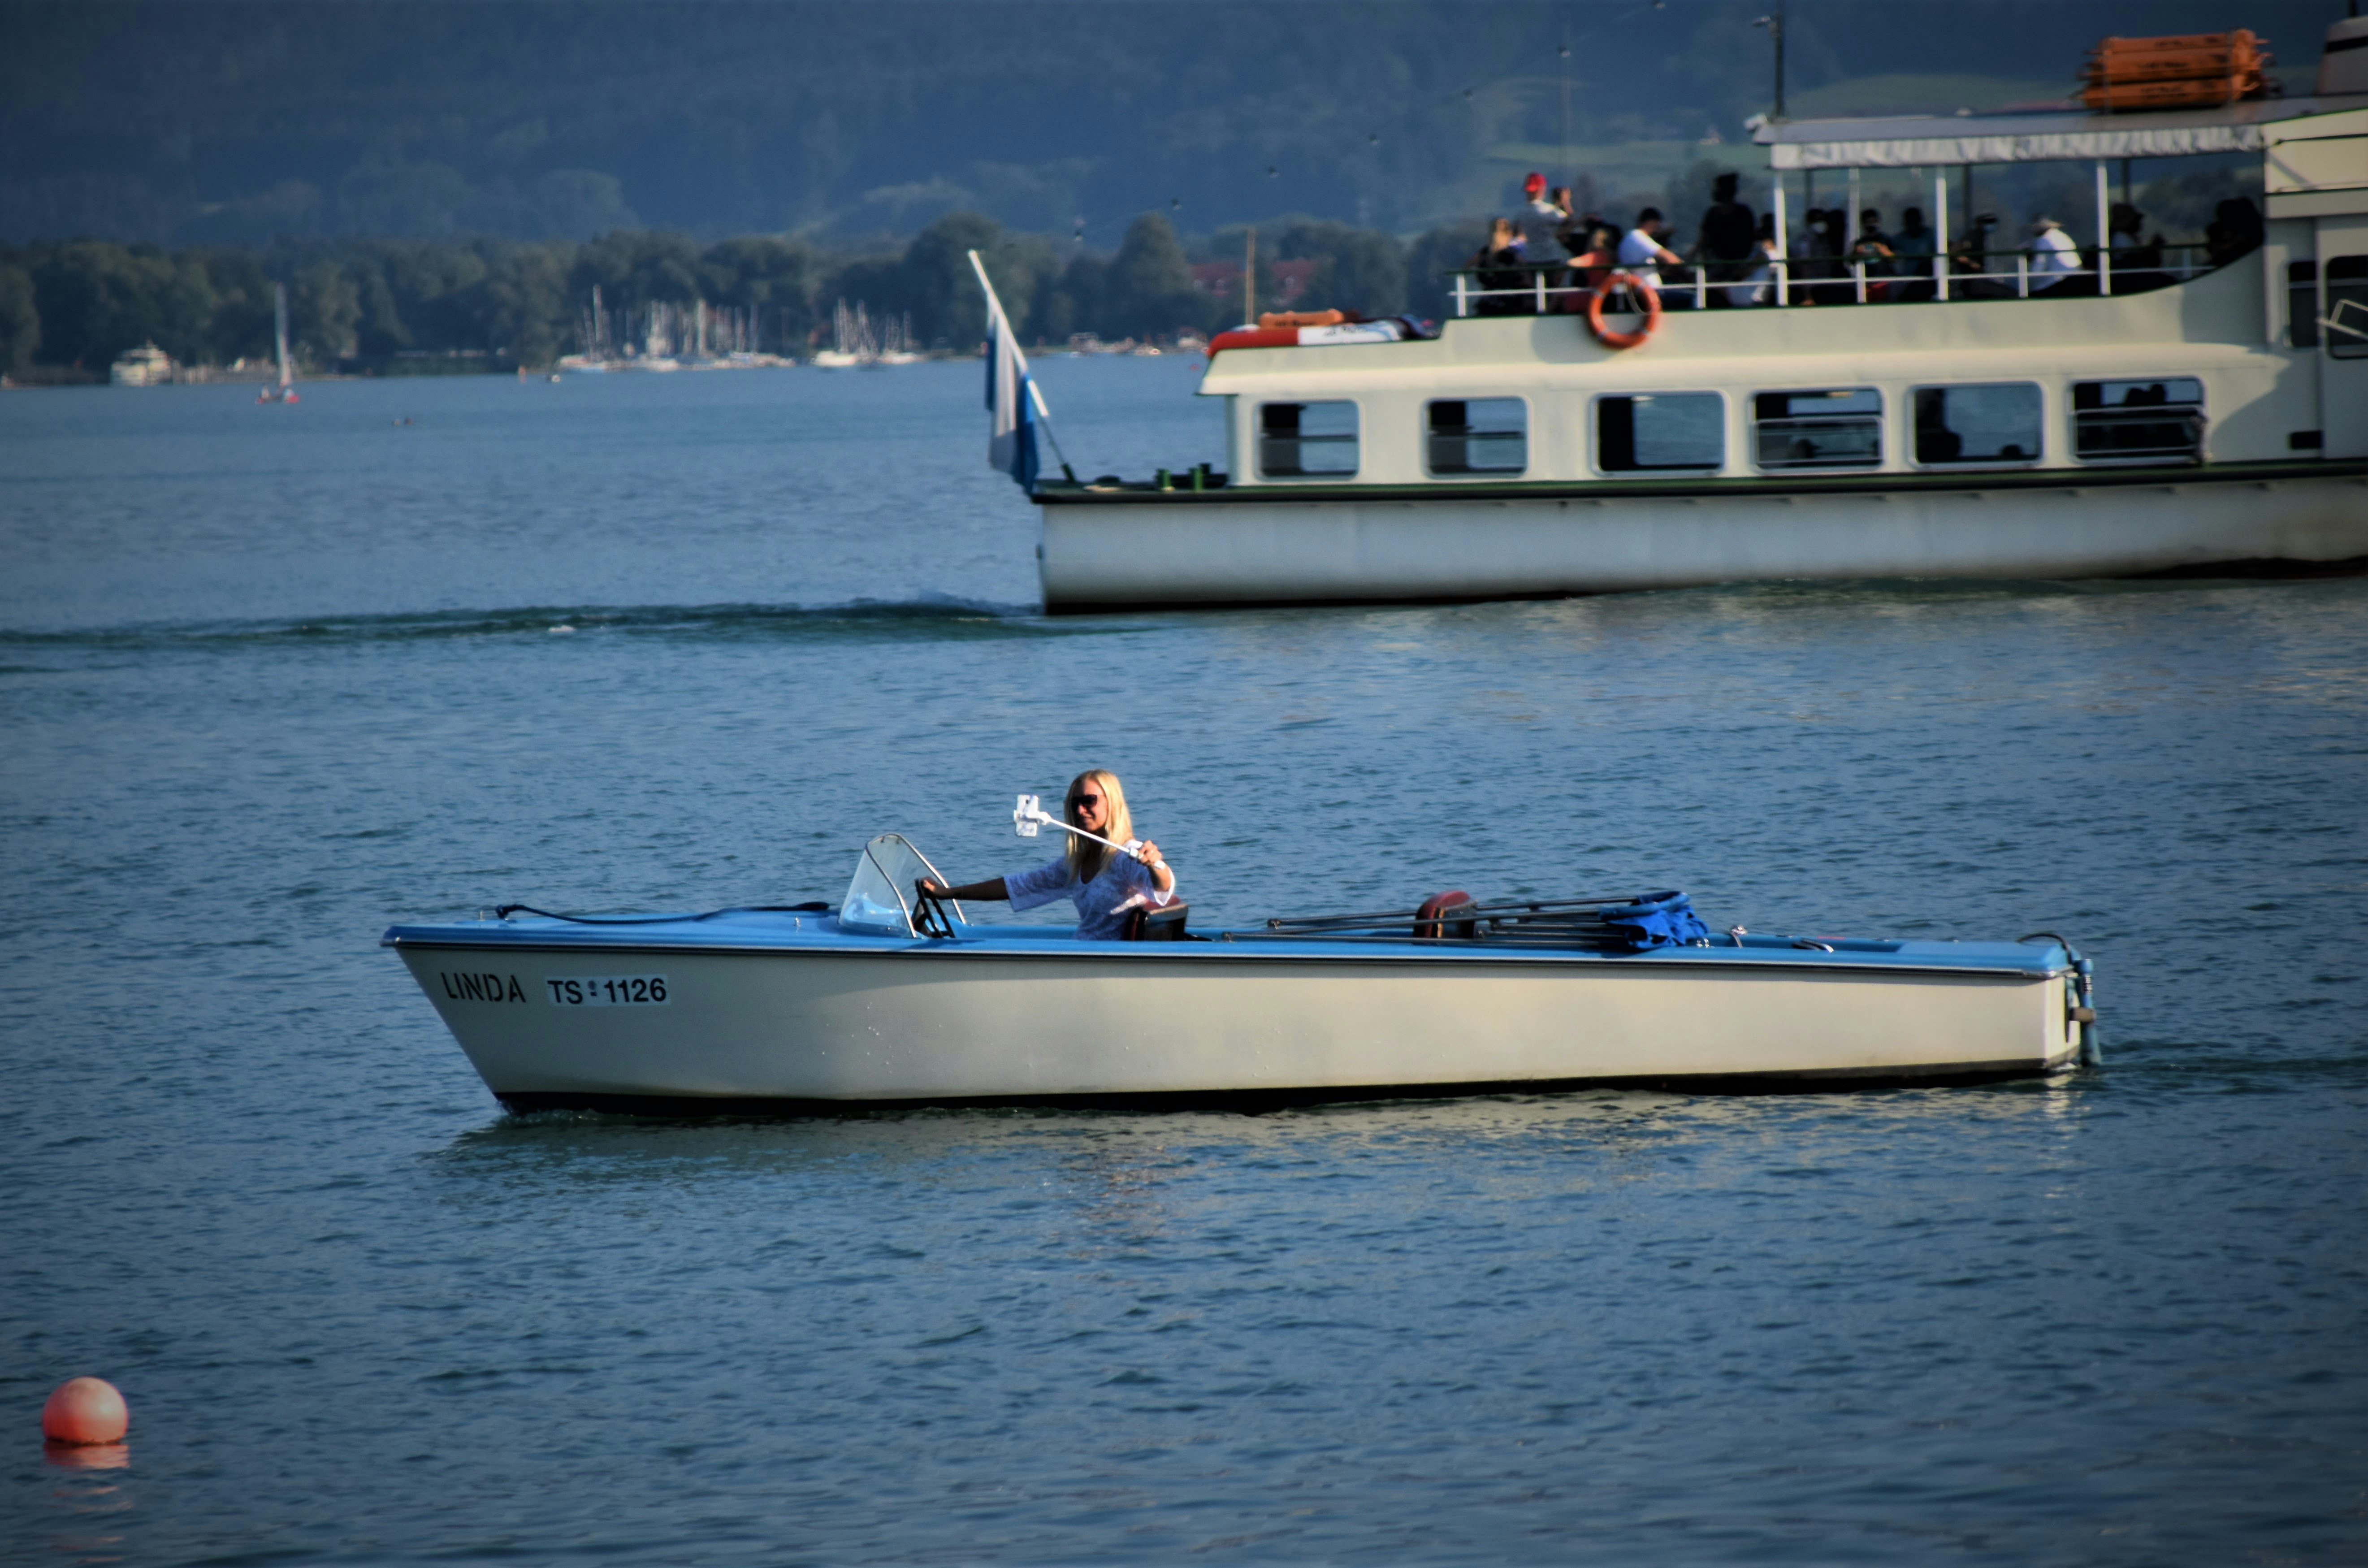 people riding on white and blue boat during daytime